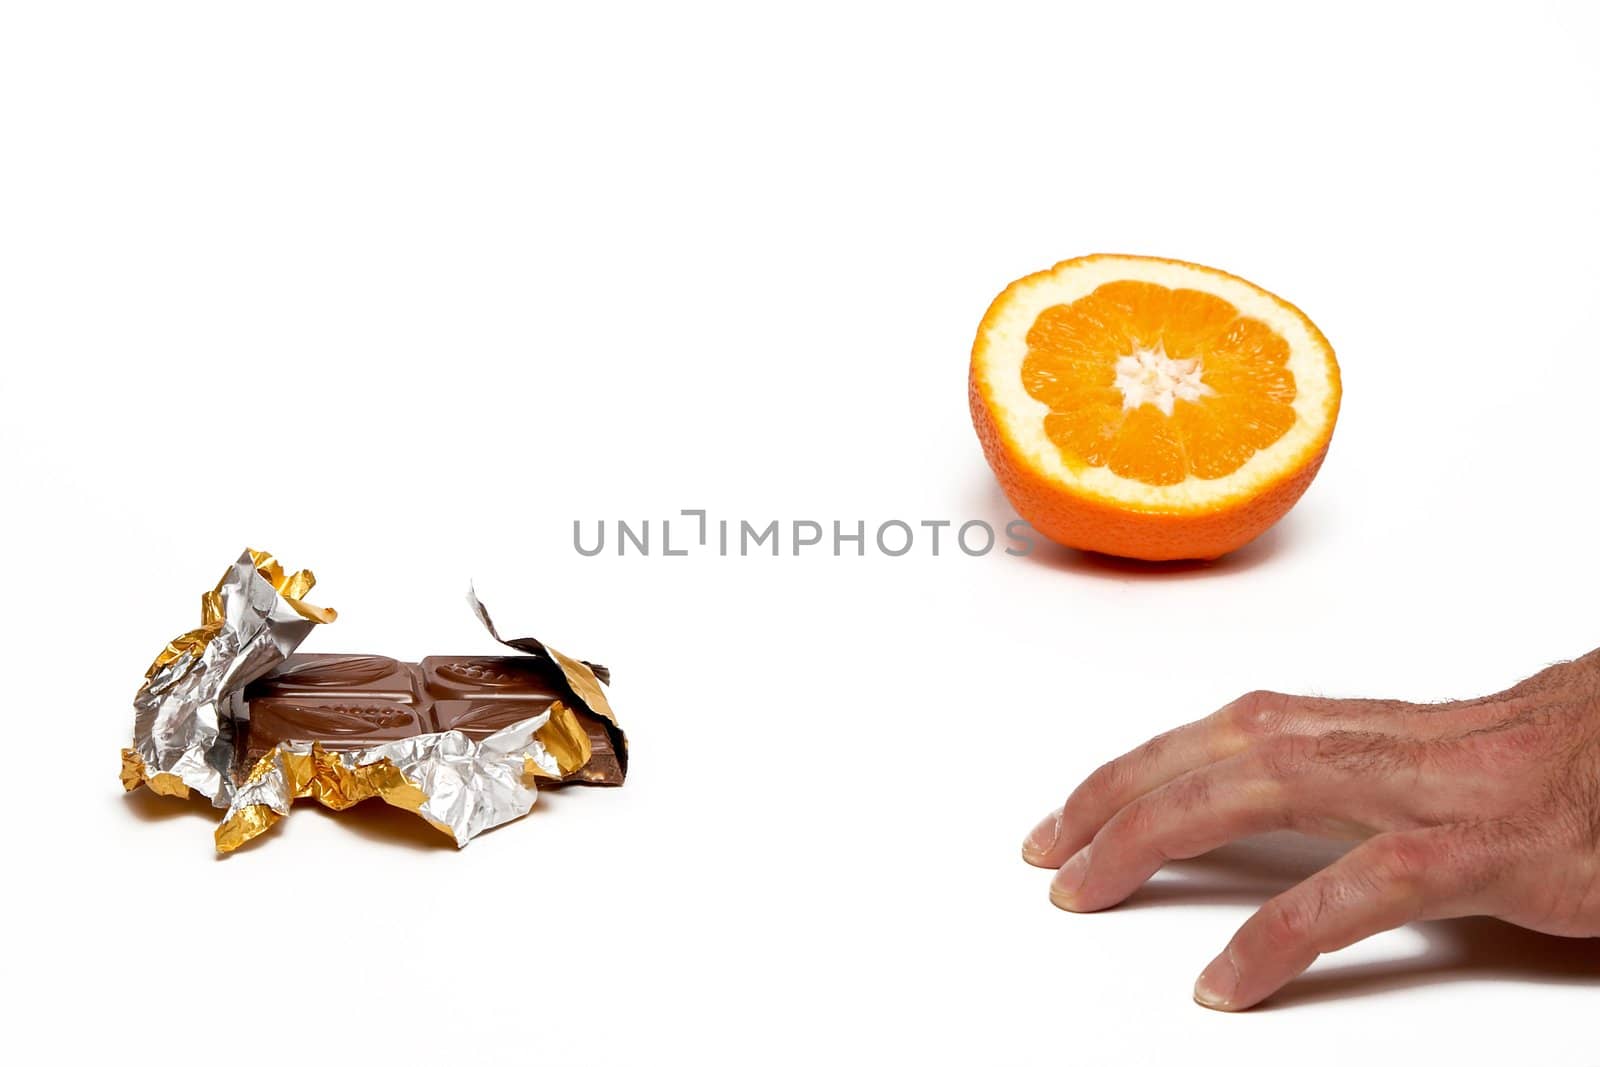 What to choose? Chocolate or orange. Saparate on white.
